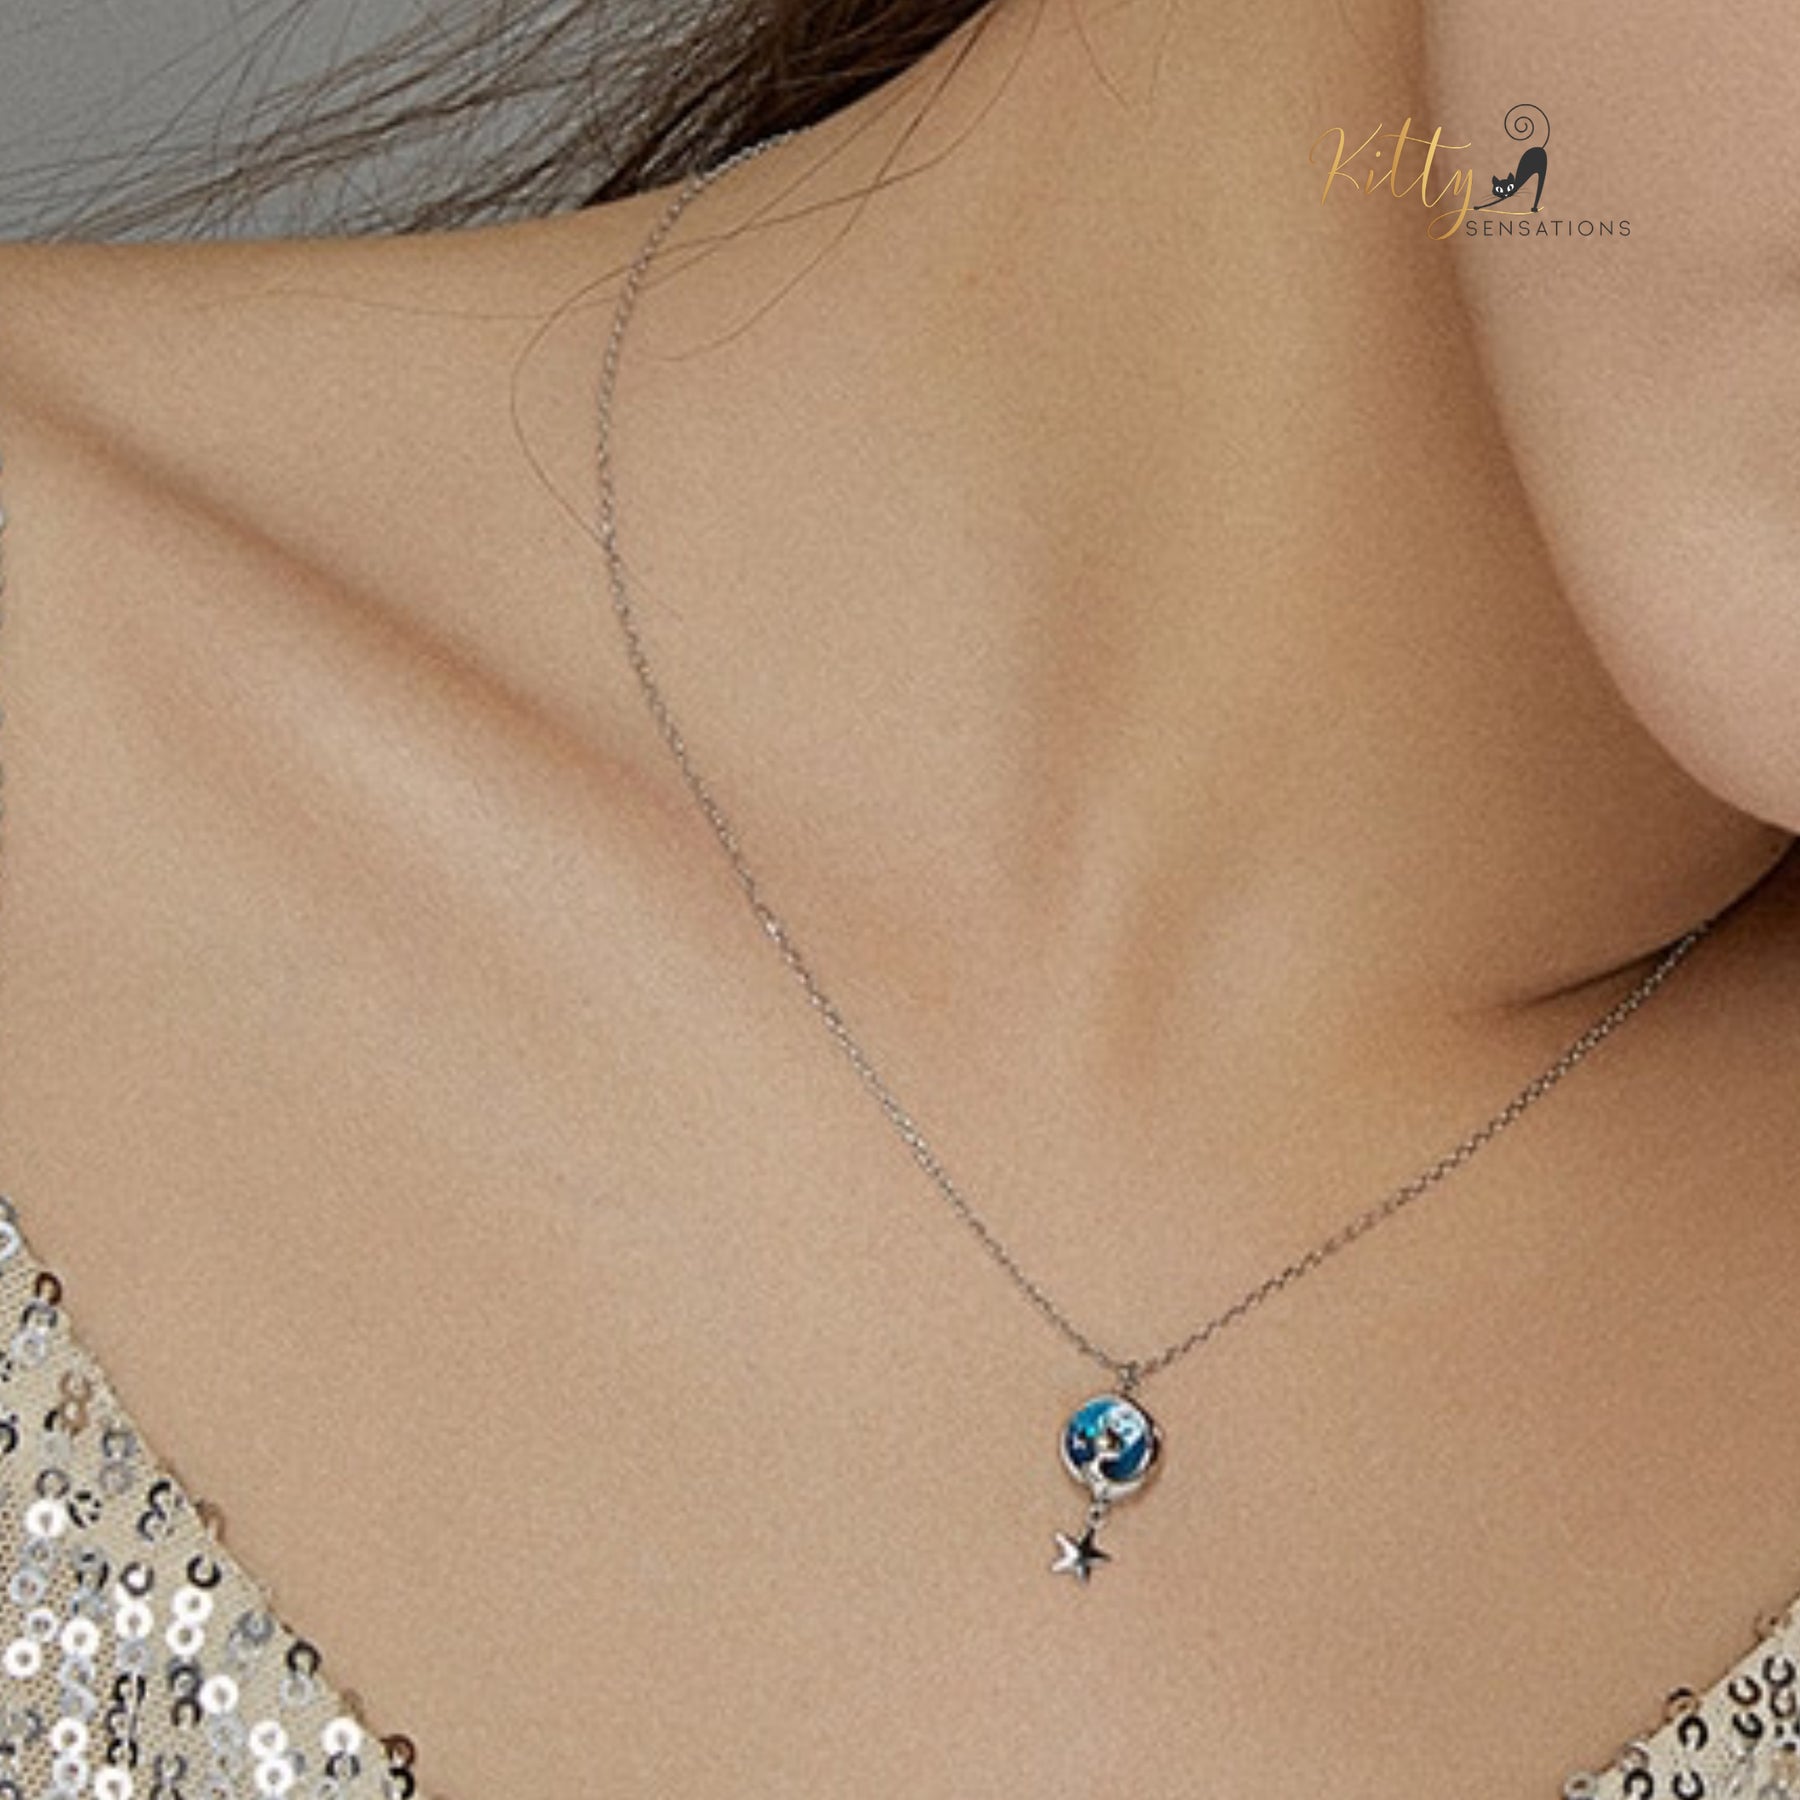 http://KittySensations.com Blue Enameled Moon Kitty Necklace in Solid 925 Sterling Silver ($58.20): https://kittysensations.com/products/blue-enameled-moon-kitty-necklace-in-solid-925-sterling-silver